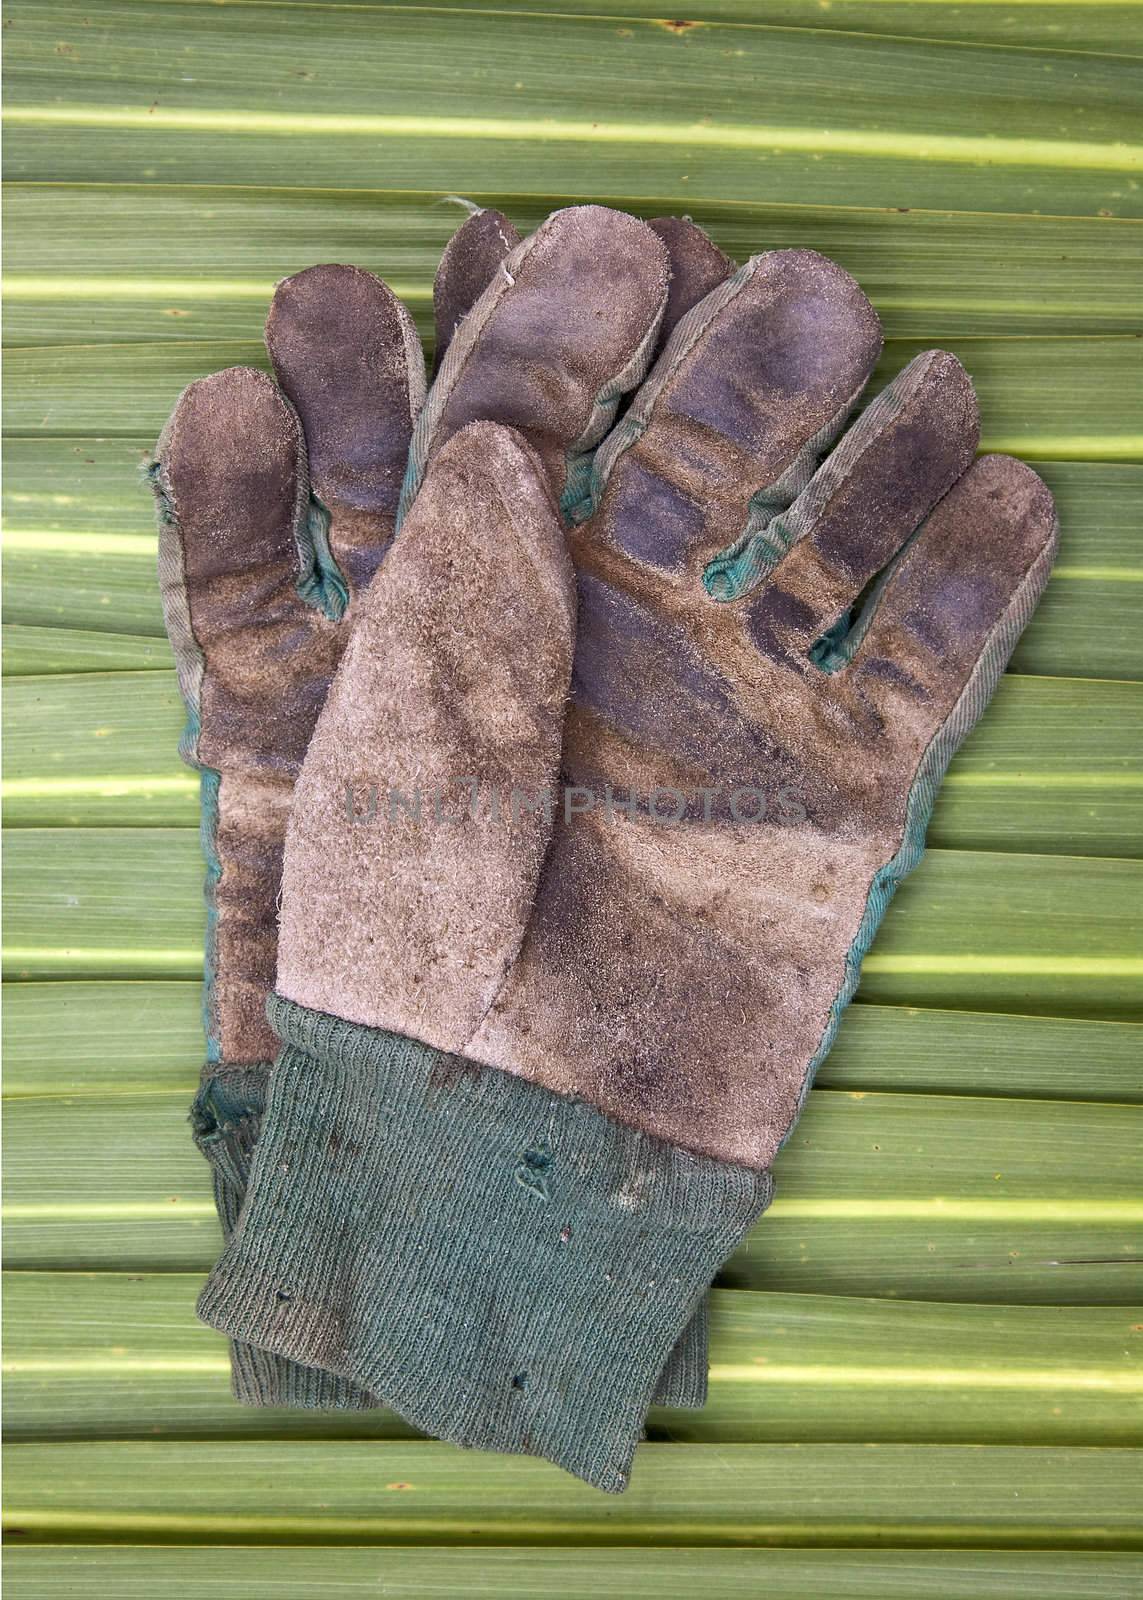 A pair of old gardening gloves on a background on Phormium leaves.